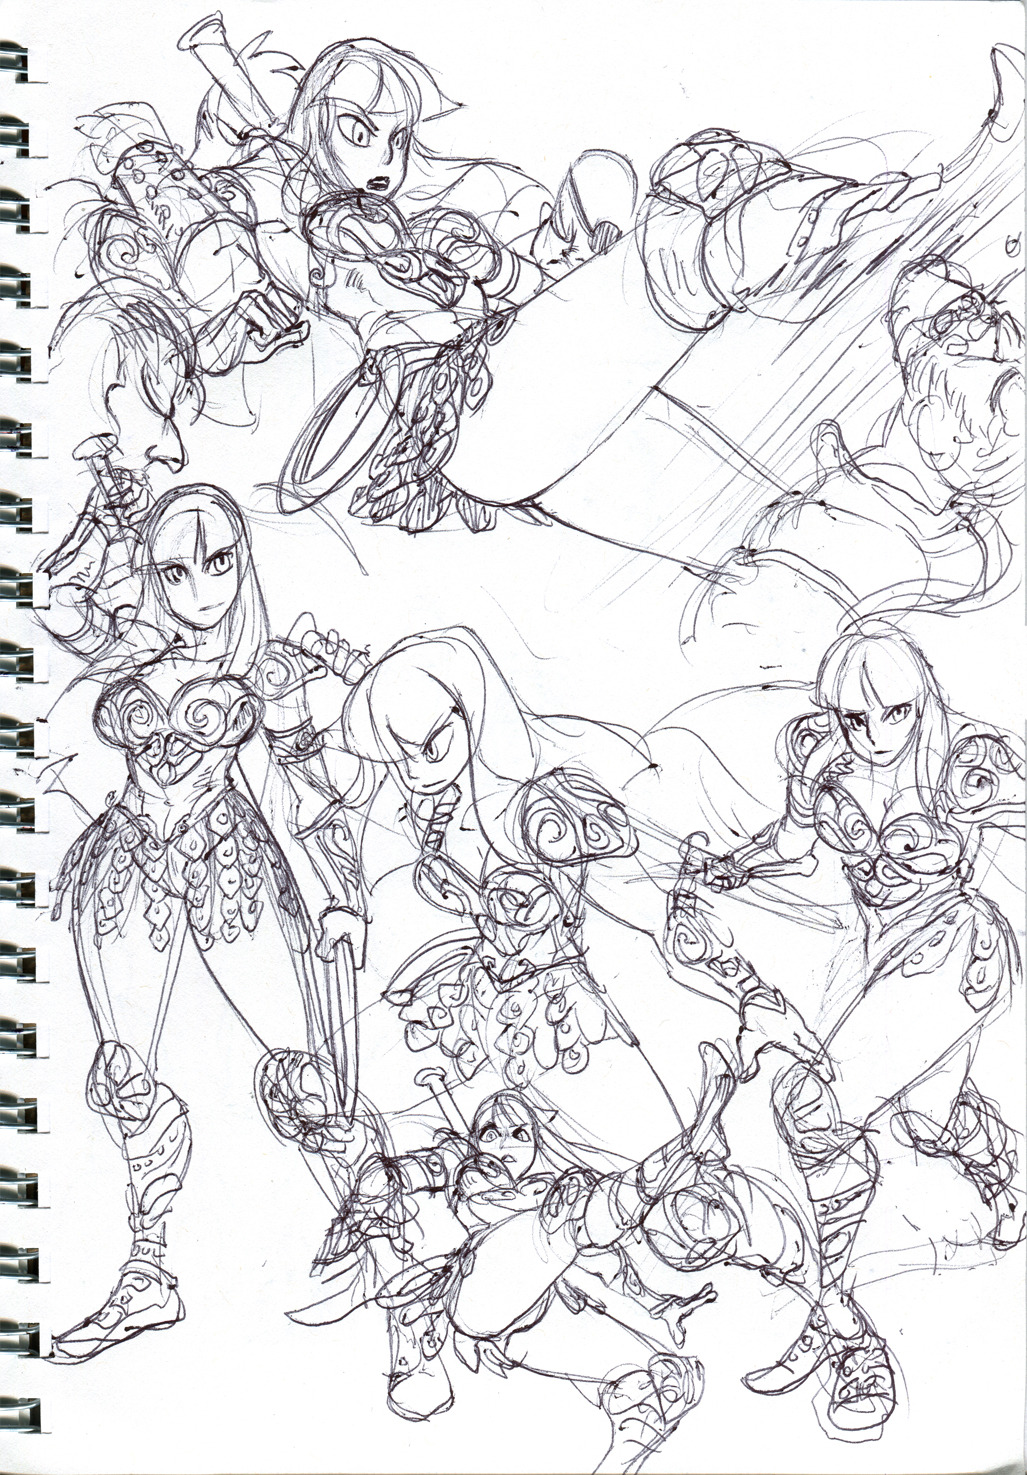 rudymora:  o-8:  Xena sketches and picture via Sketch Dailies. I spent too much time